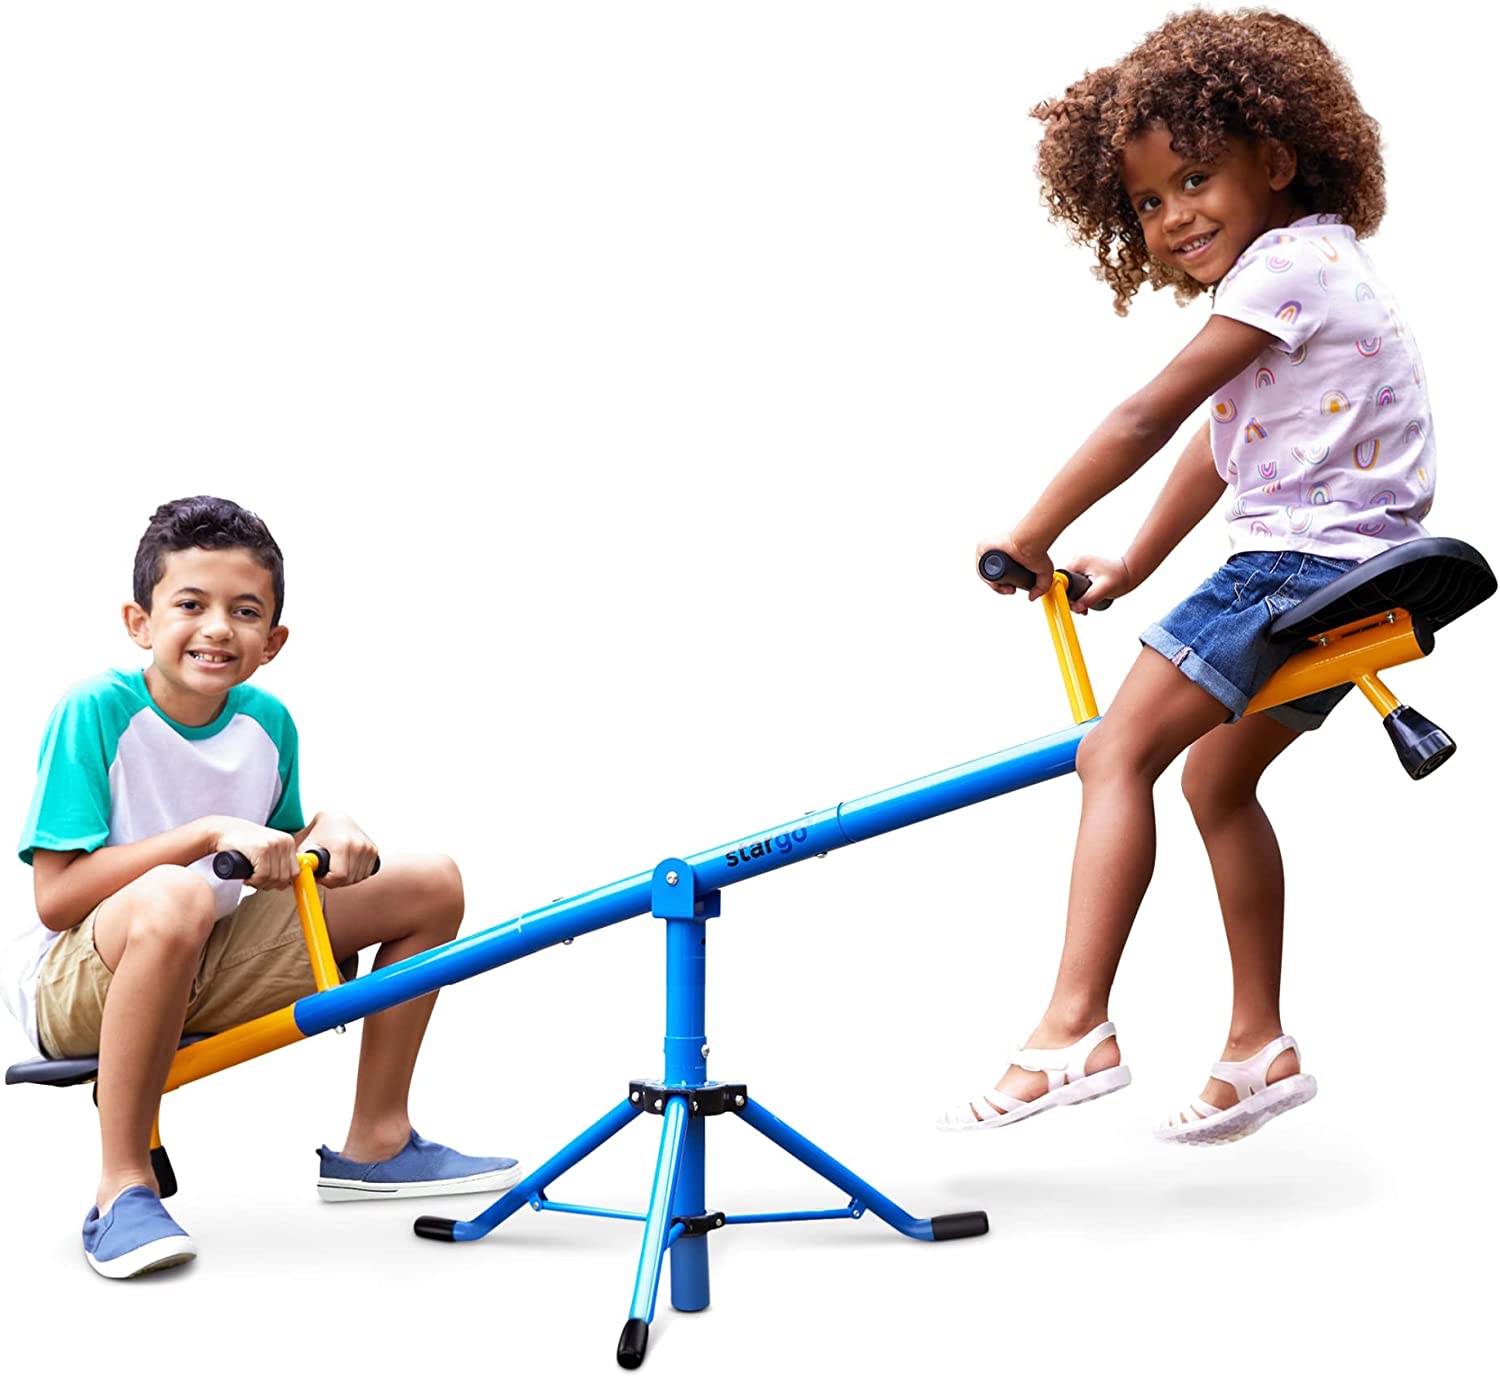 Stargo 360 Swivel Spinning Seesaw for Kids, Teeter Totter with Adjustable Frame Height 46-70”, Indoor or Outdoor Playground Equipment for Toddlers - image 1 of 9